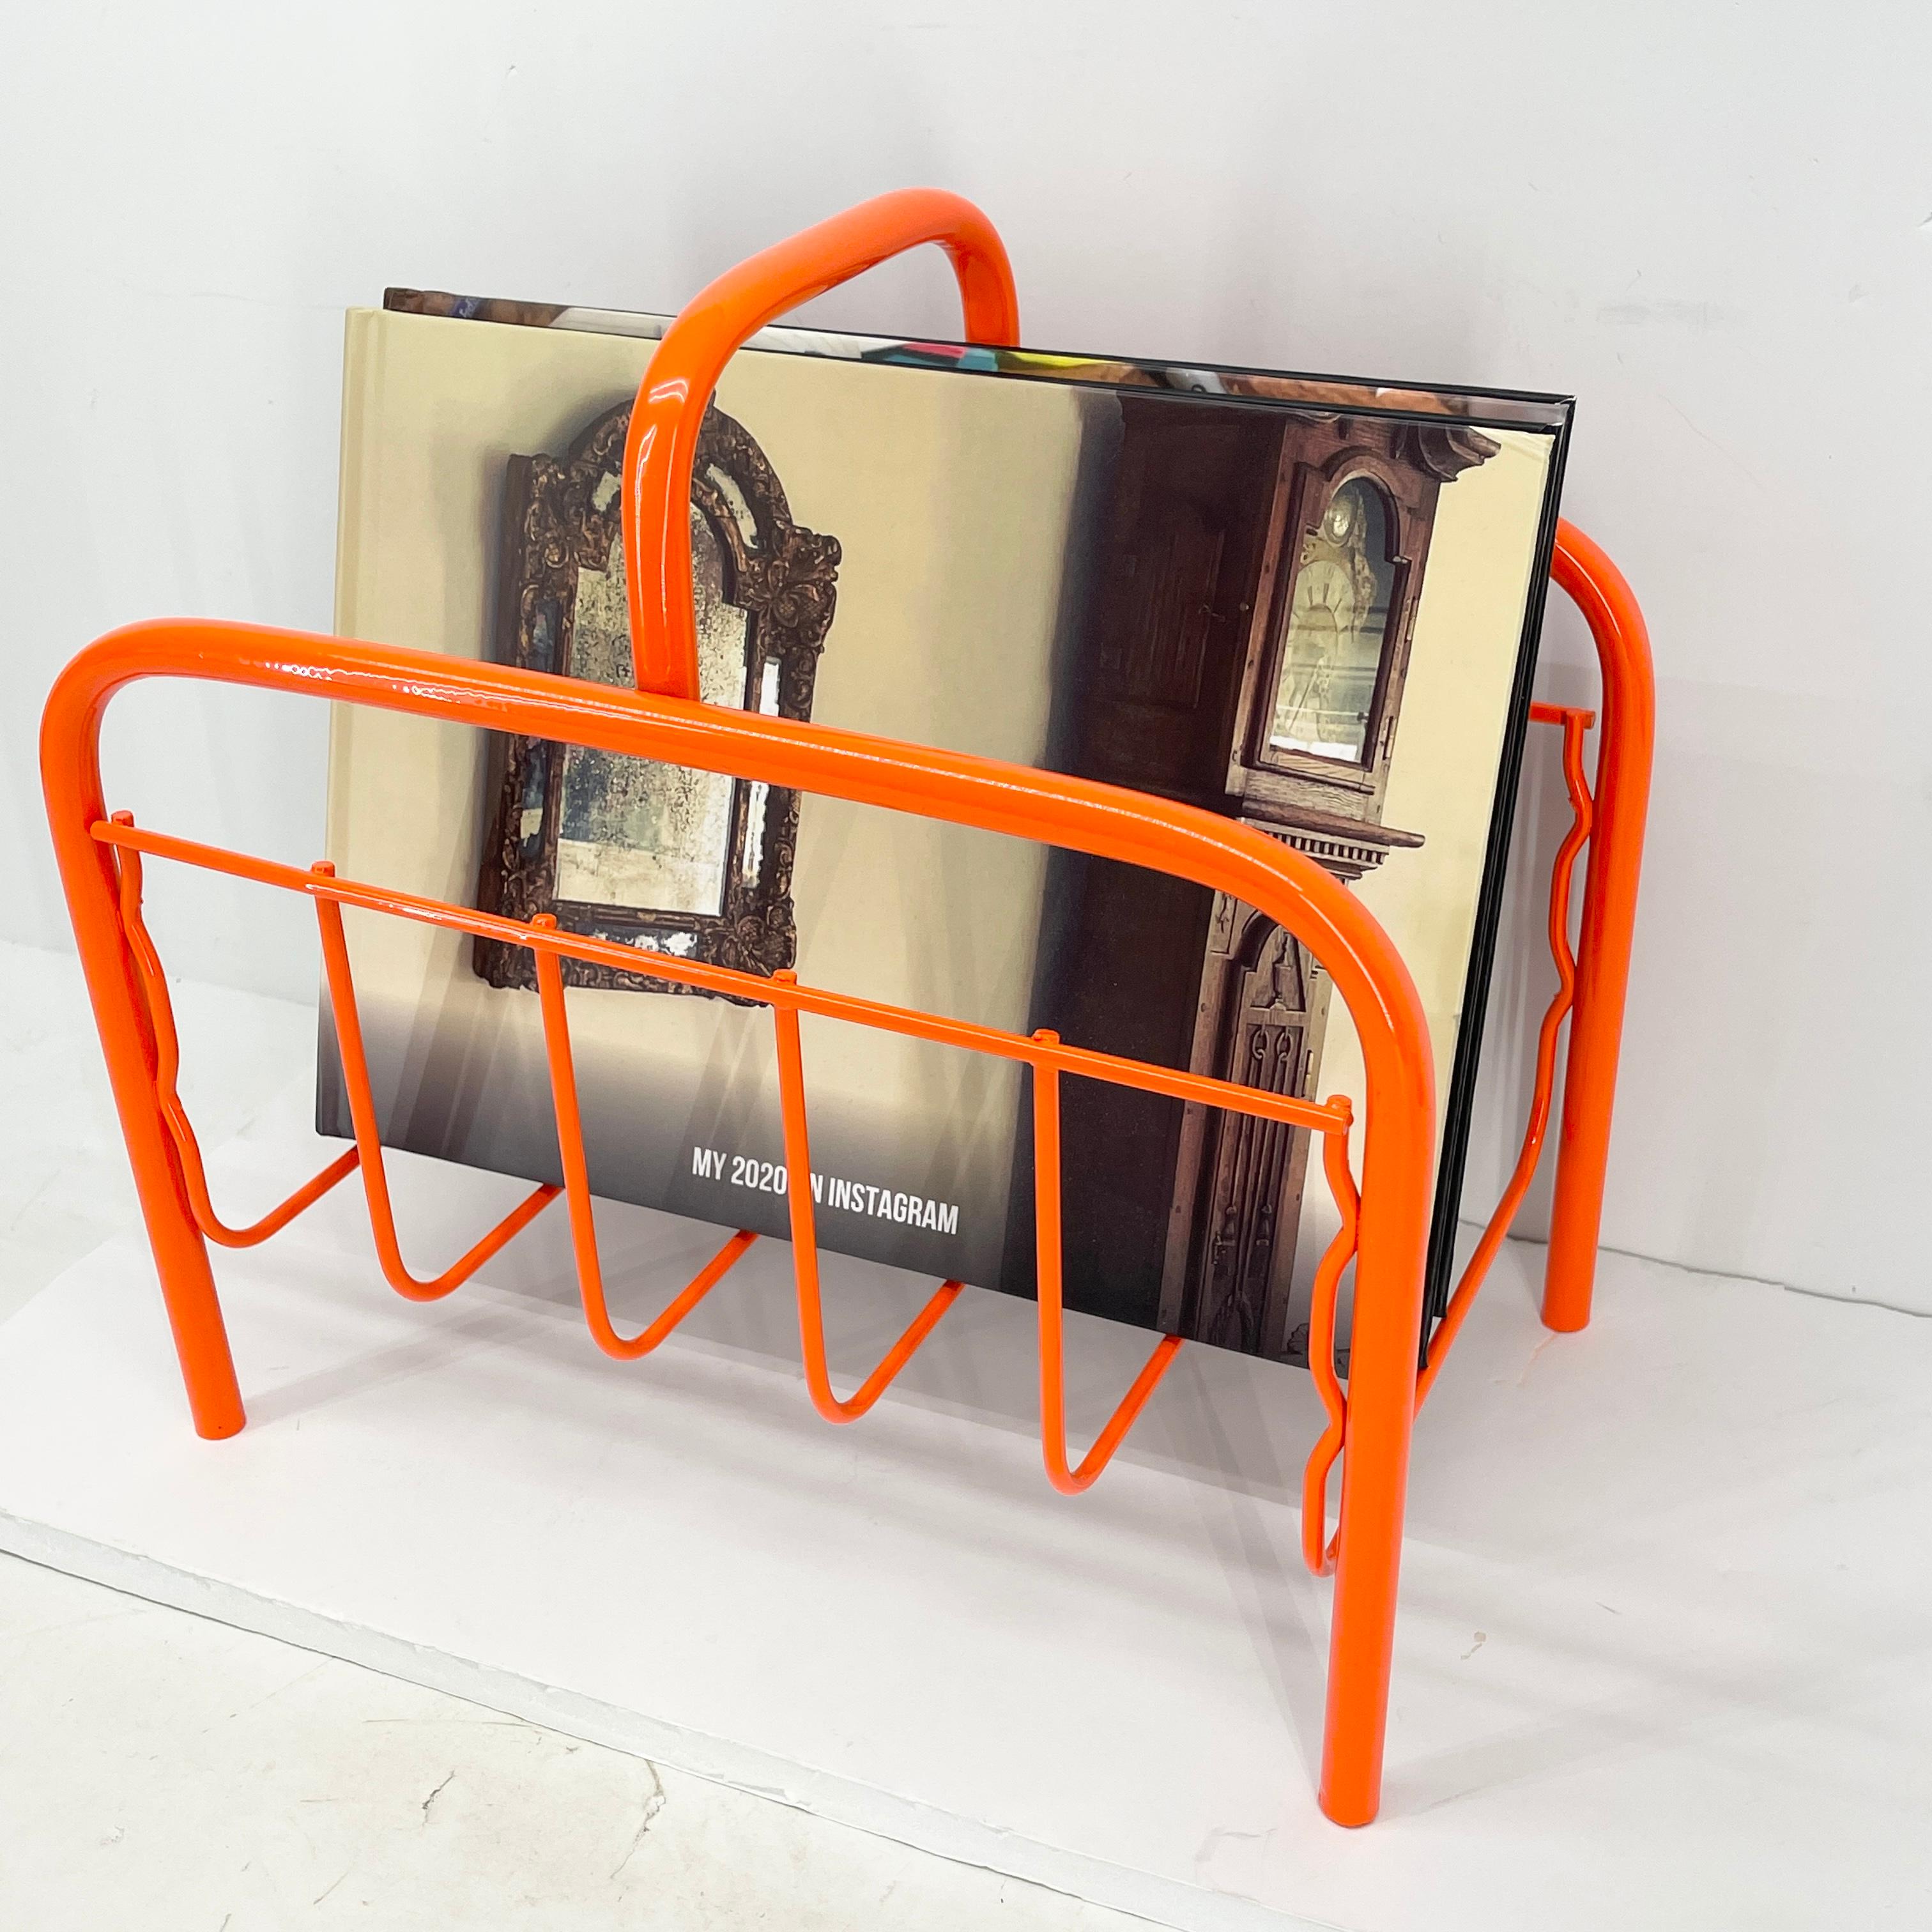 Mid-Century Modern magazine or record albums rack freshly powder coated in bold bright red orange. This rack is small but mighty. It will make a statement in any room. Sturdy metal rack holds magazines or vinyl records and is a fun addition to an